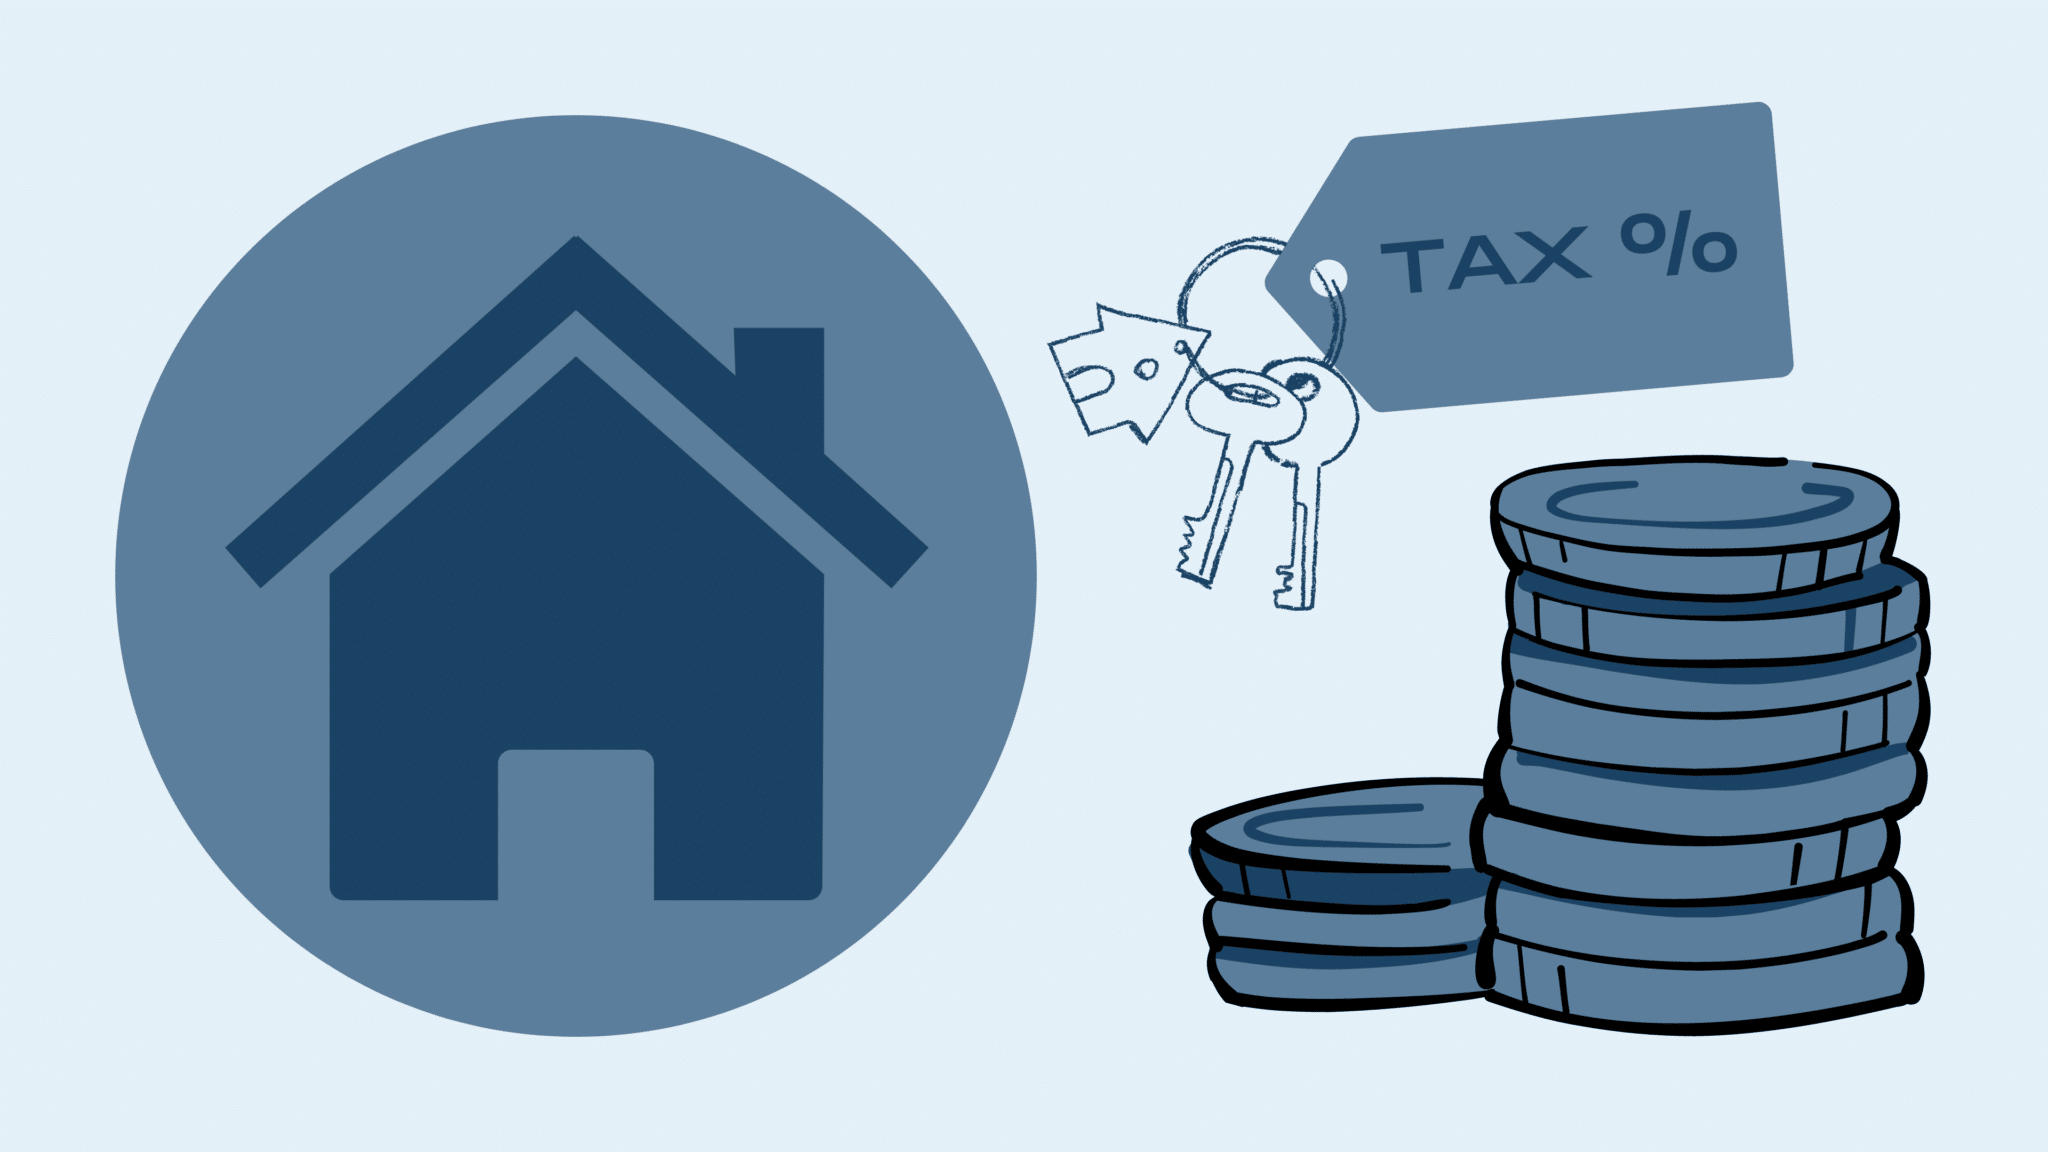 A silhuette of a house, a keychain with a tag that says "tax %", and a stack of coins